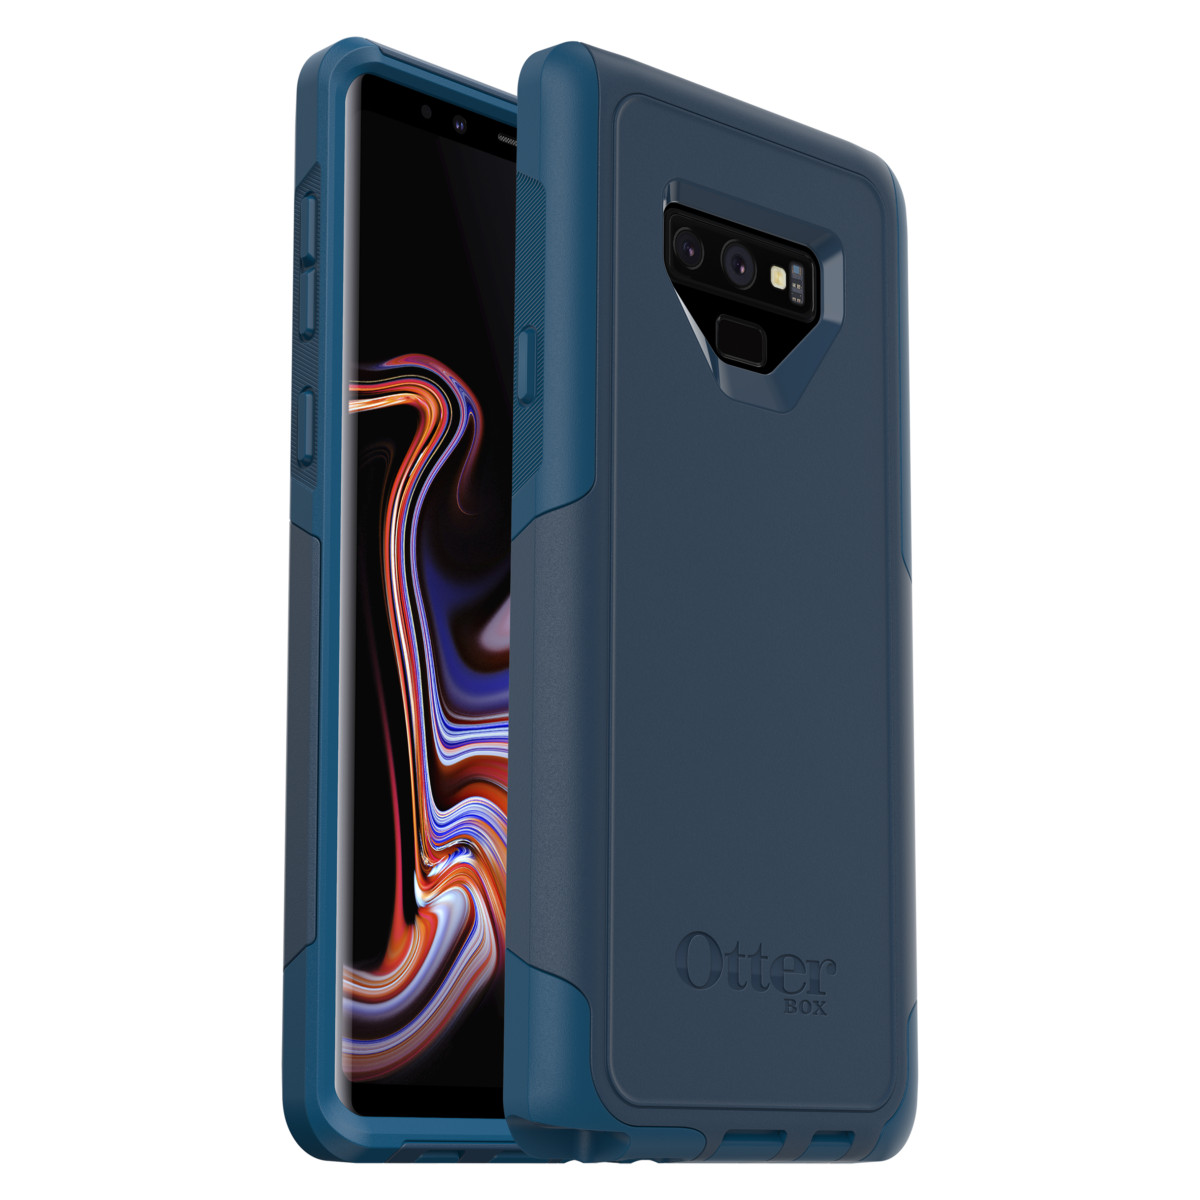 Otterbox Symmetry, Commuter and Defender Galaxy Note9 casings now available in Malaysia 4